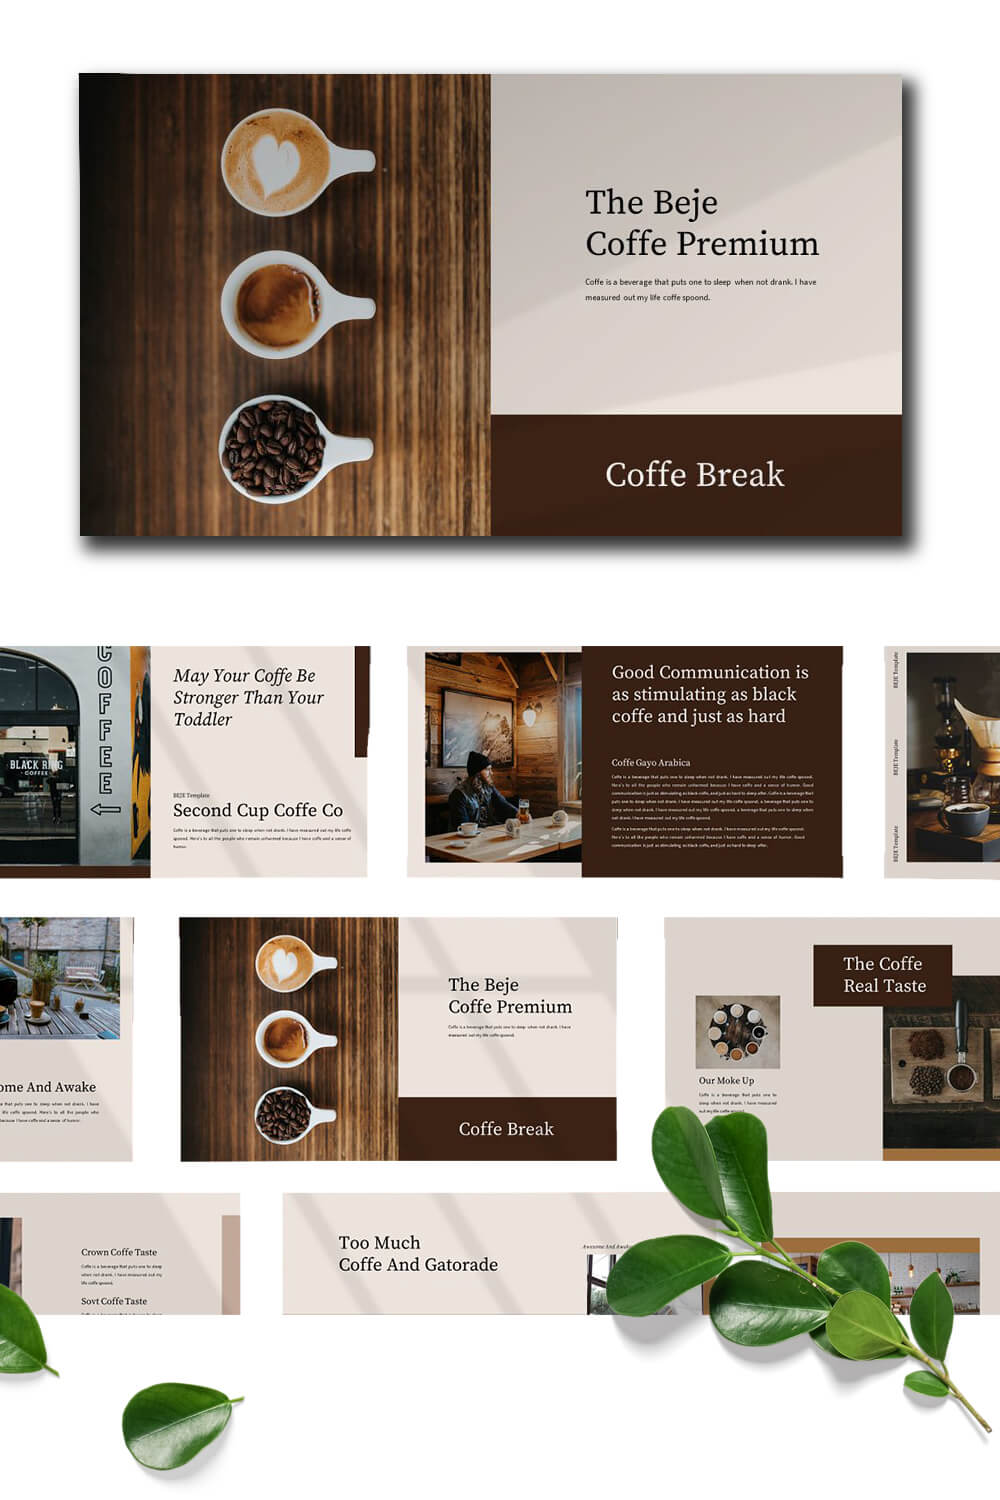 Different pages of the same coffee for the presentation.